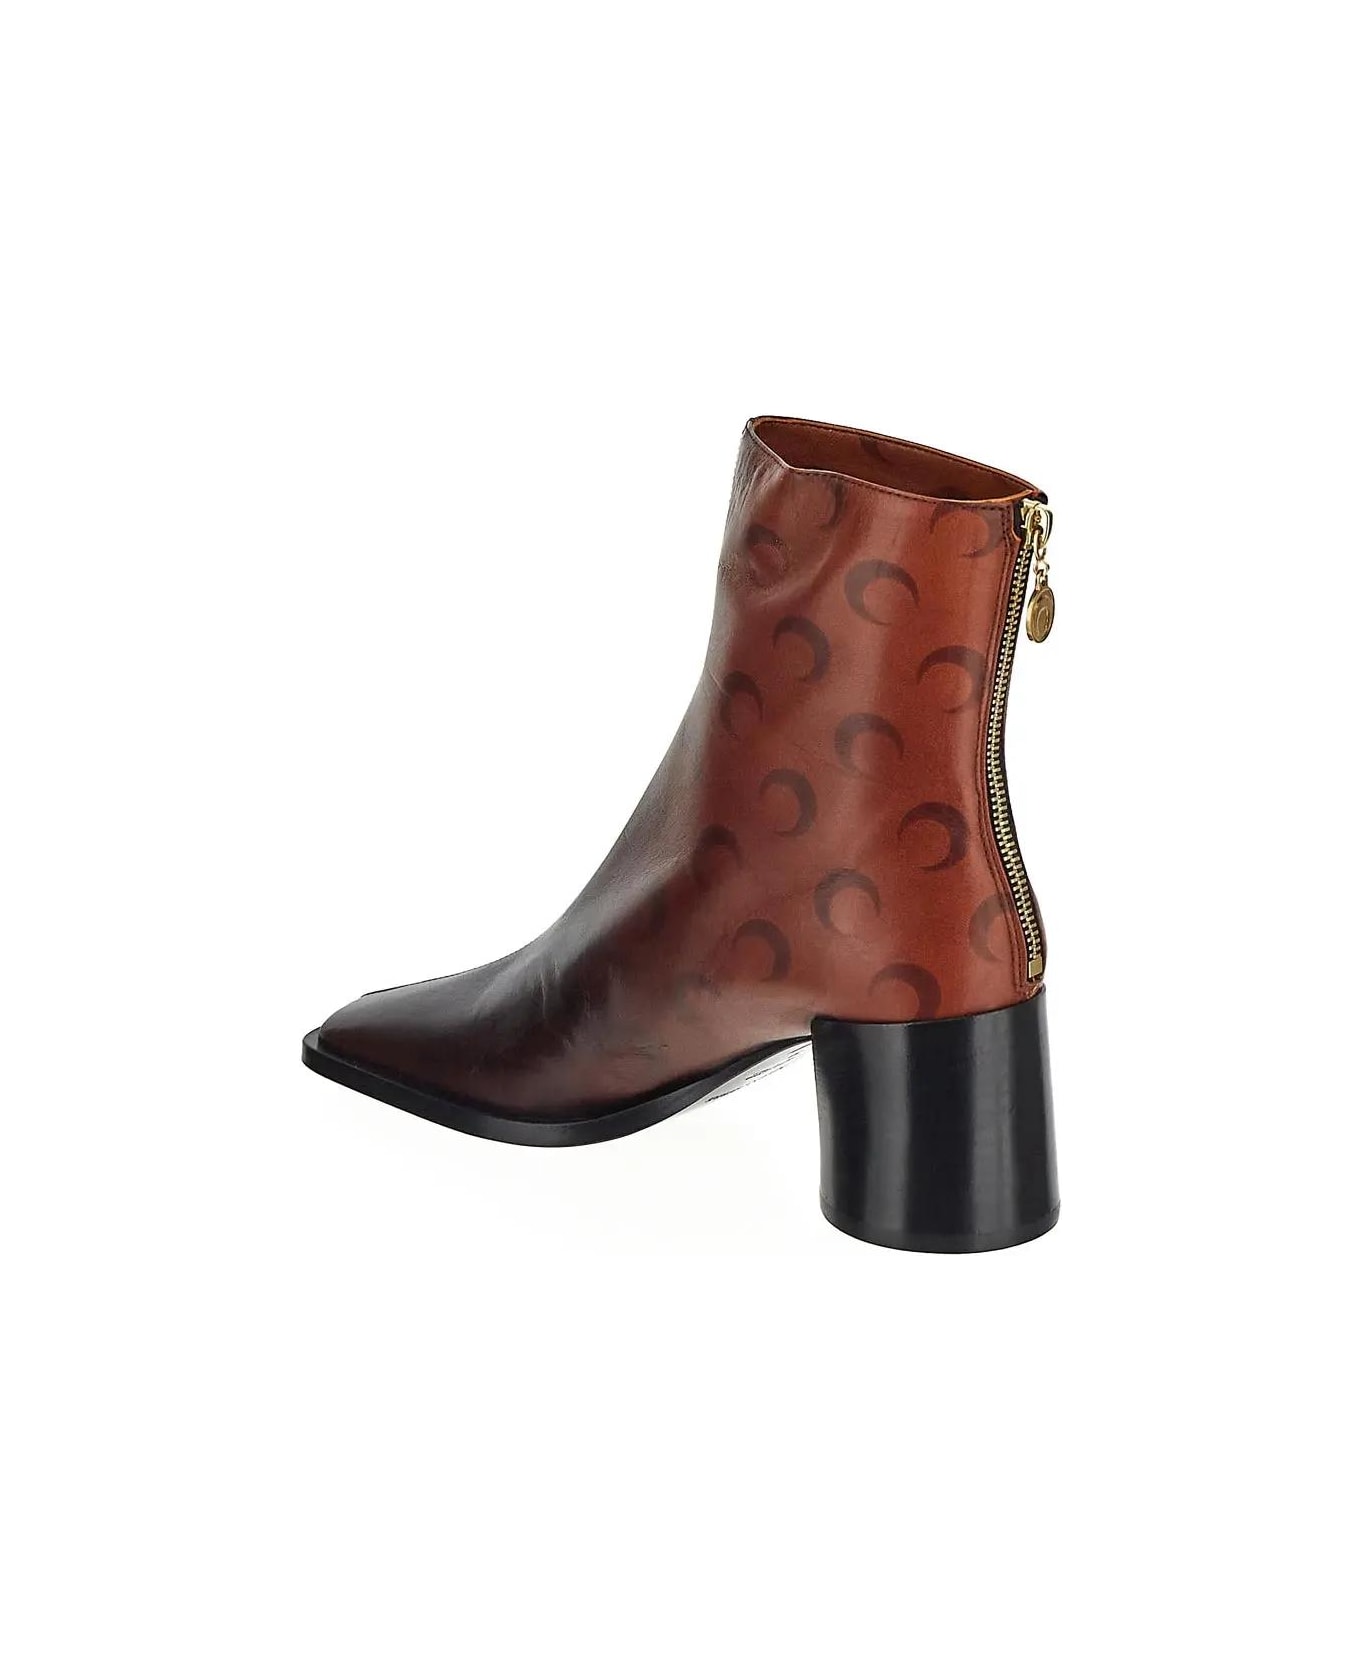 Marine Serre Airbrushed Leather Ankle Boots - BROWN